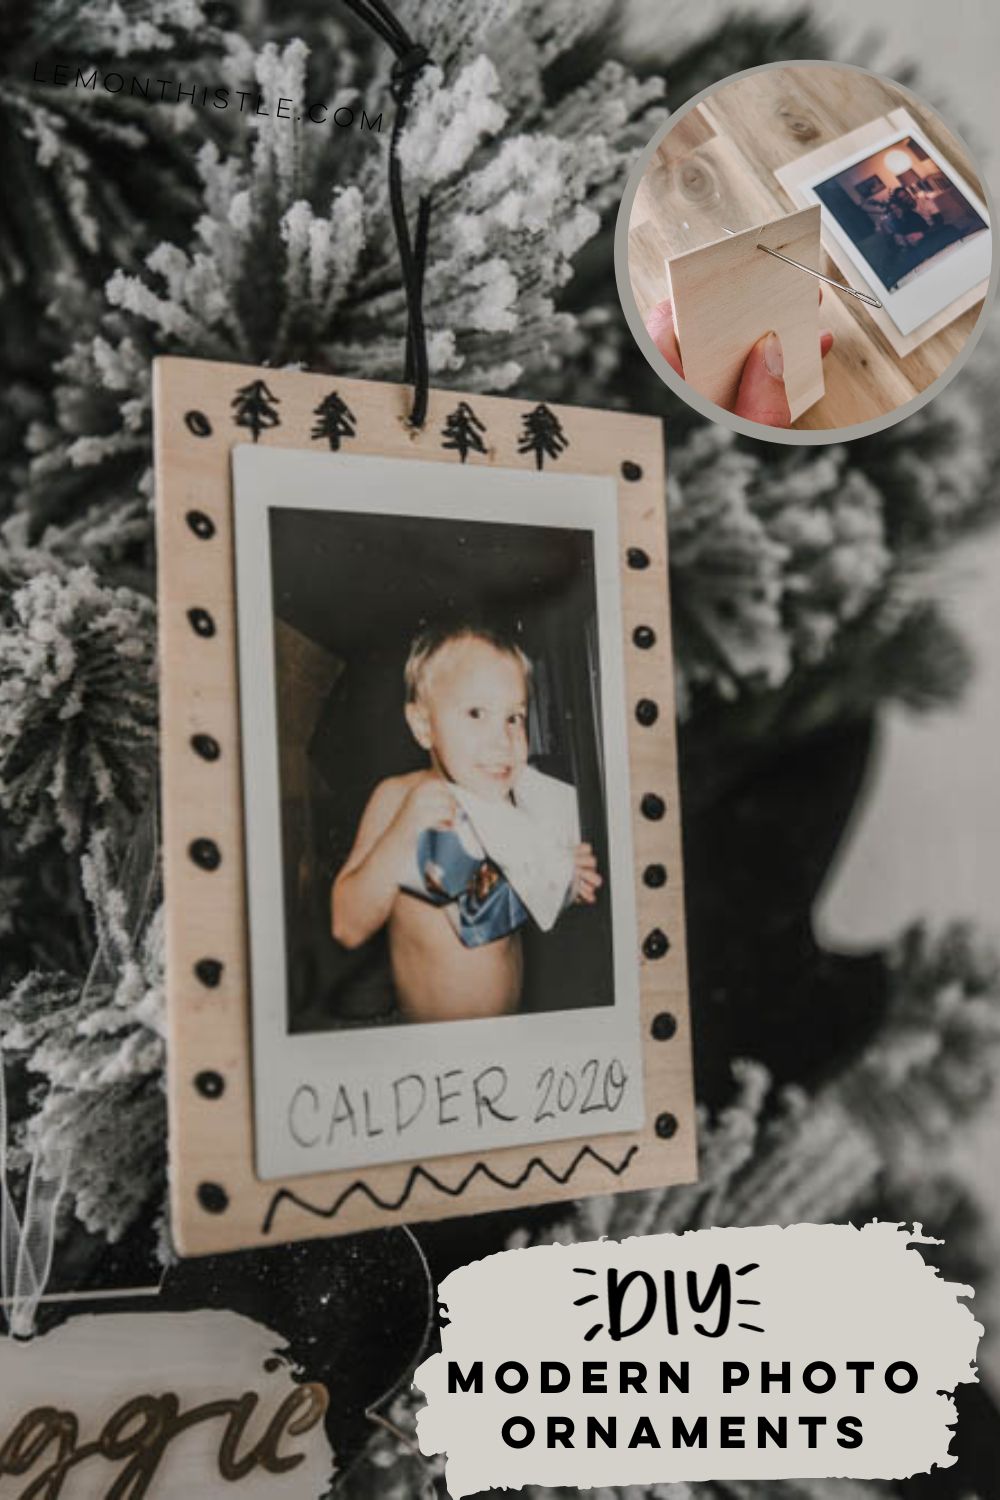 Scandi inspired photo ornaments using instax photos and black ink details on wood
Text overlay reads DIY Photo Ornament Tutorial